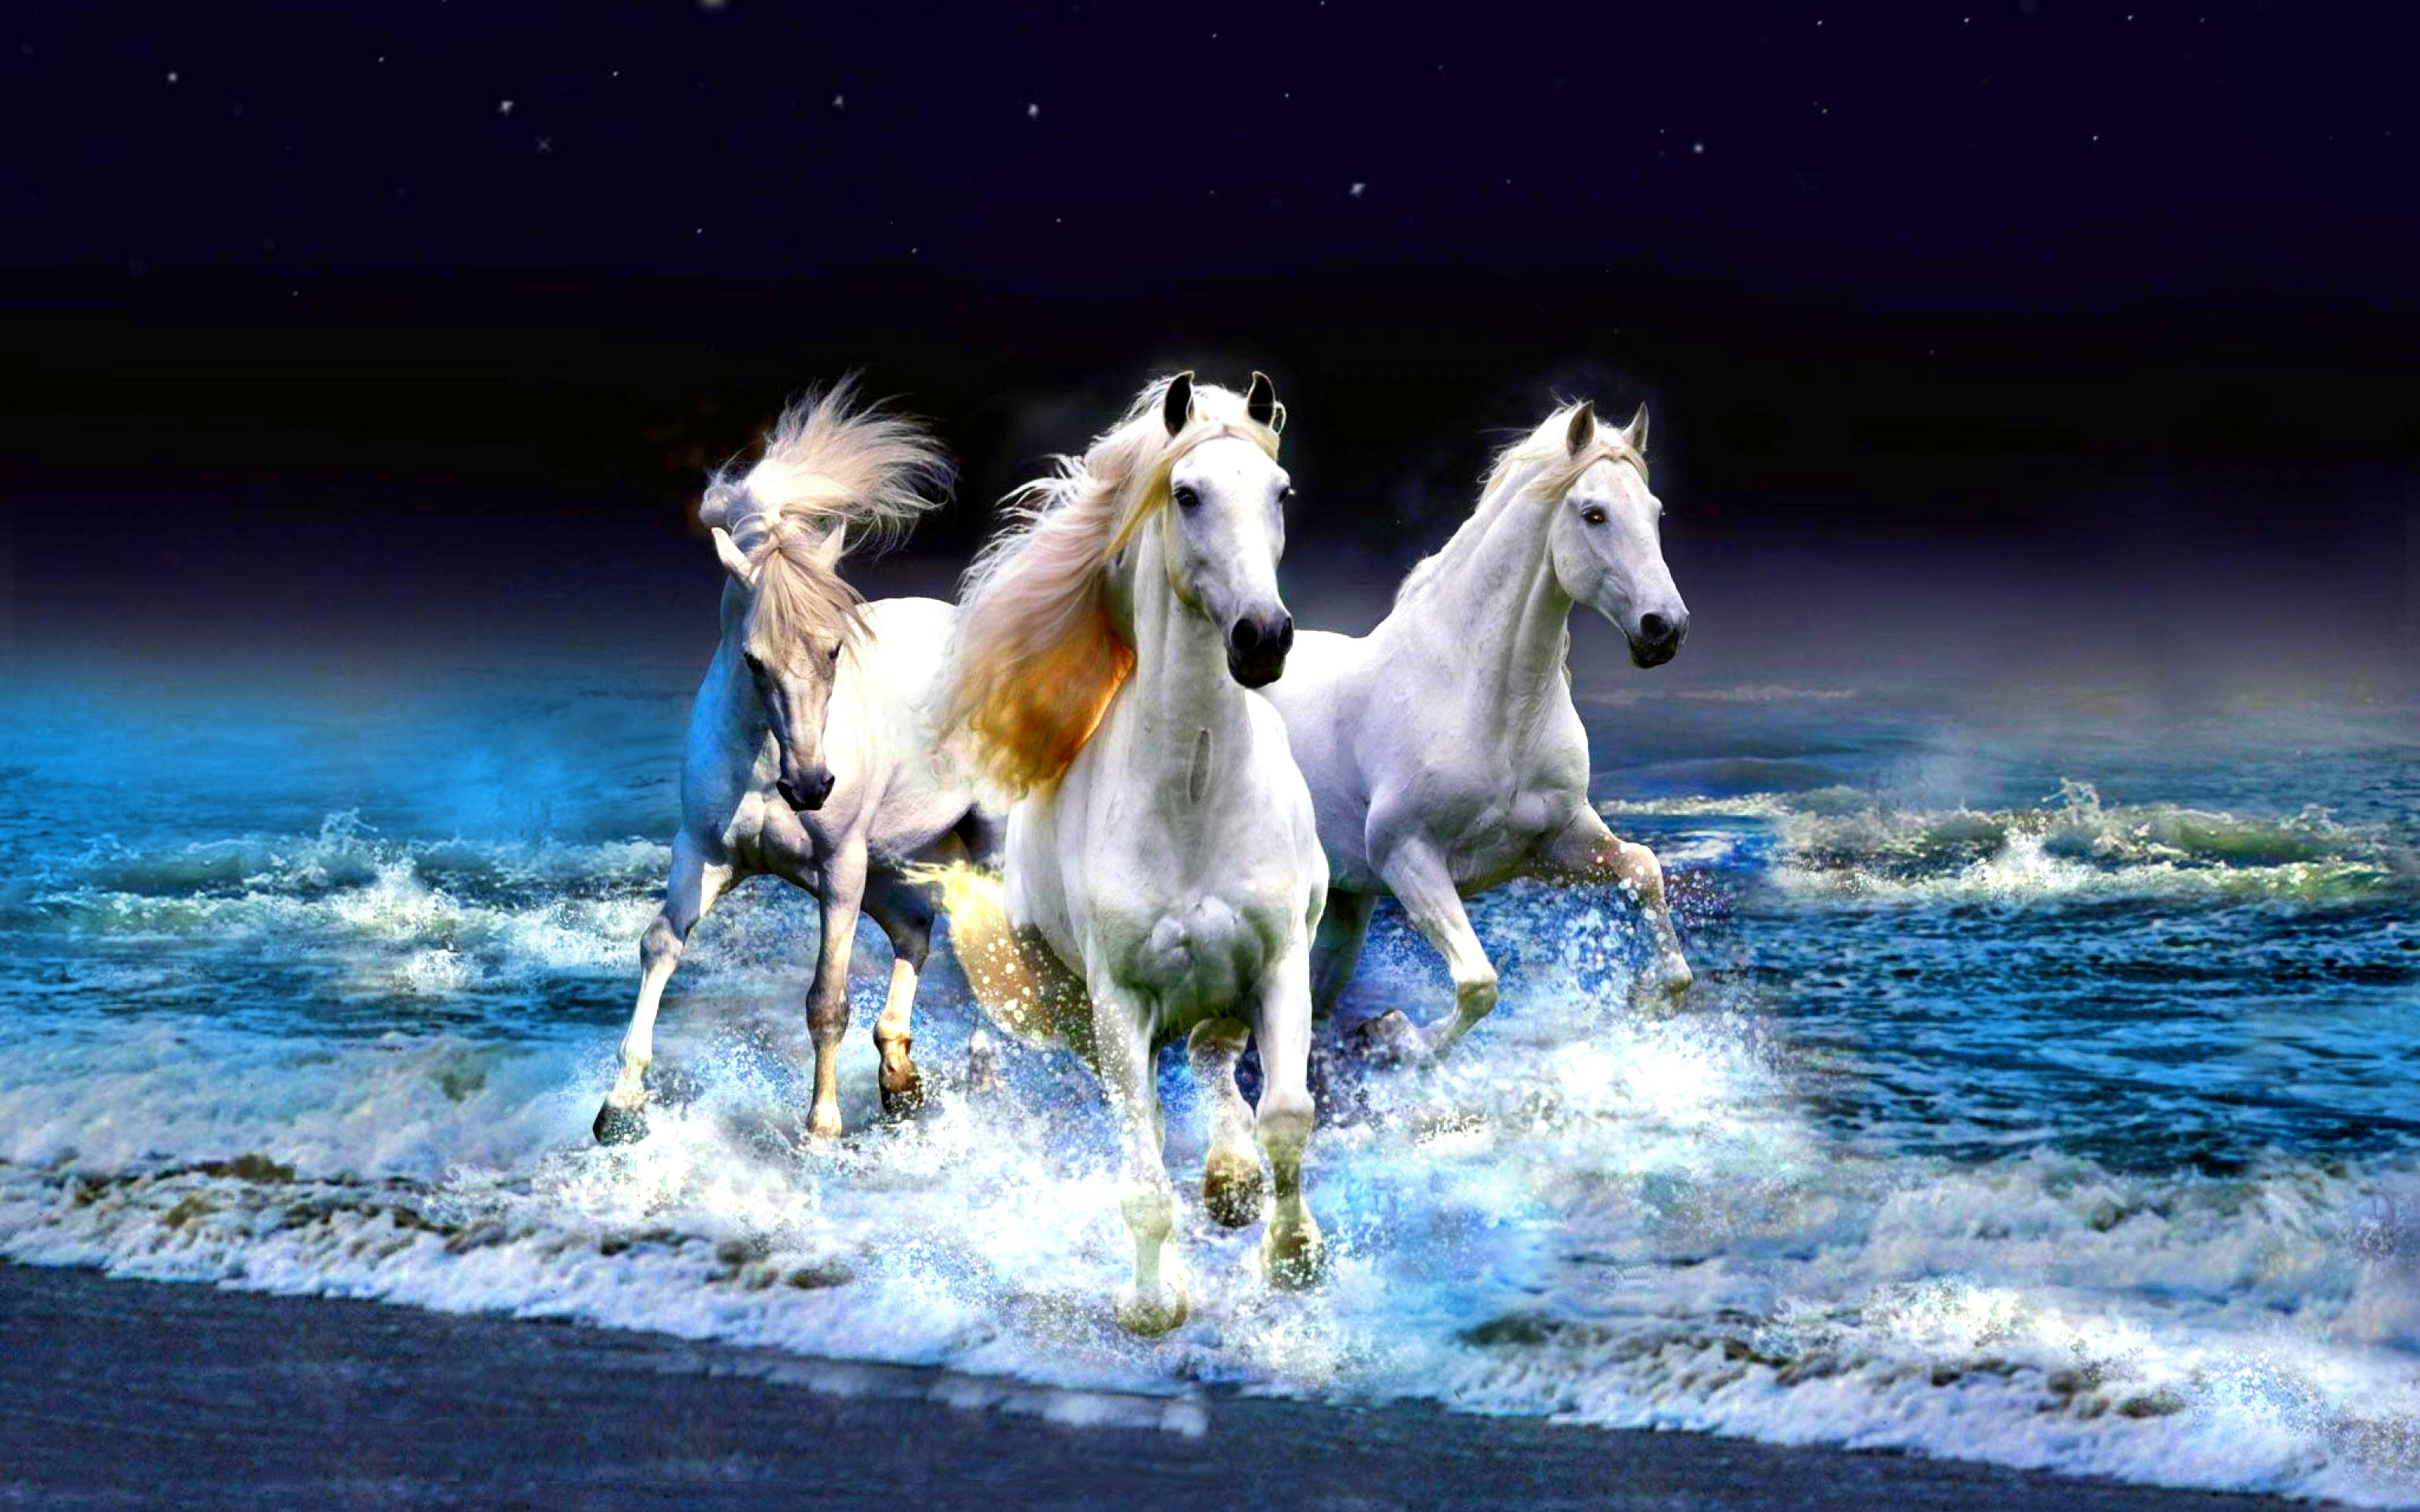 3072x1920 HD Wallpaper | Background Image ID:321674.  Animal Horse